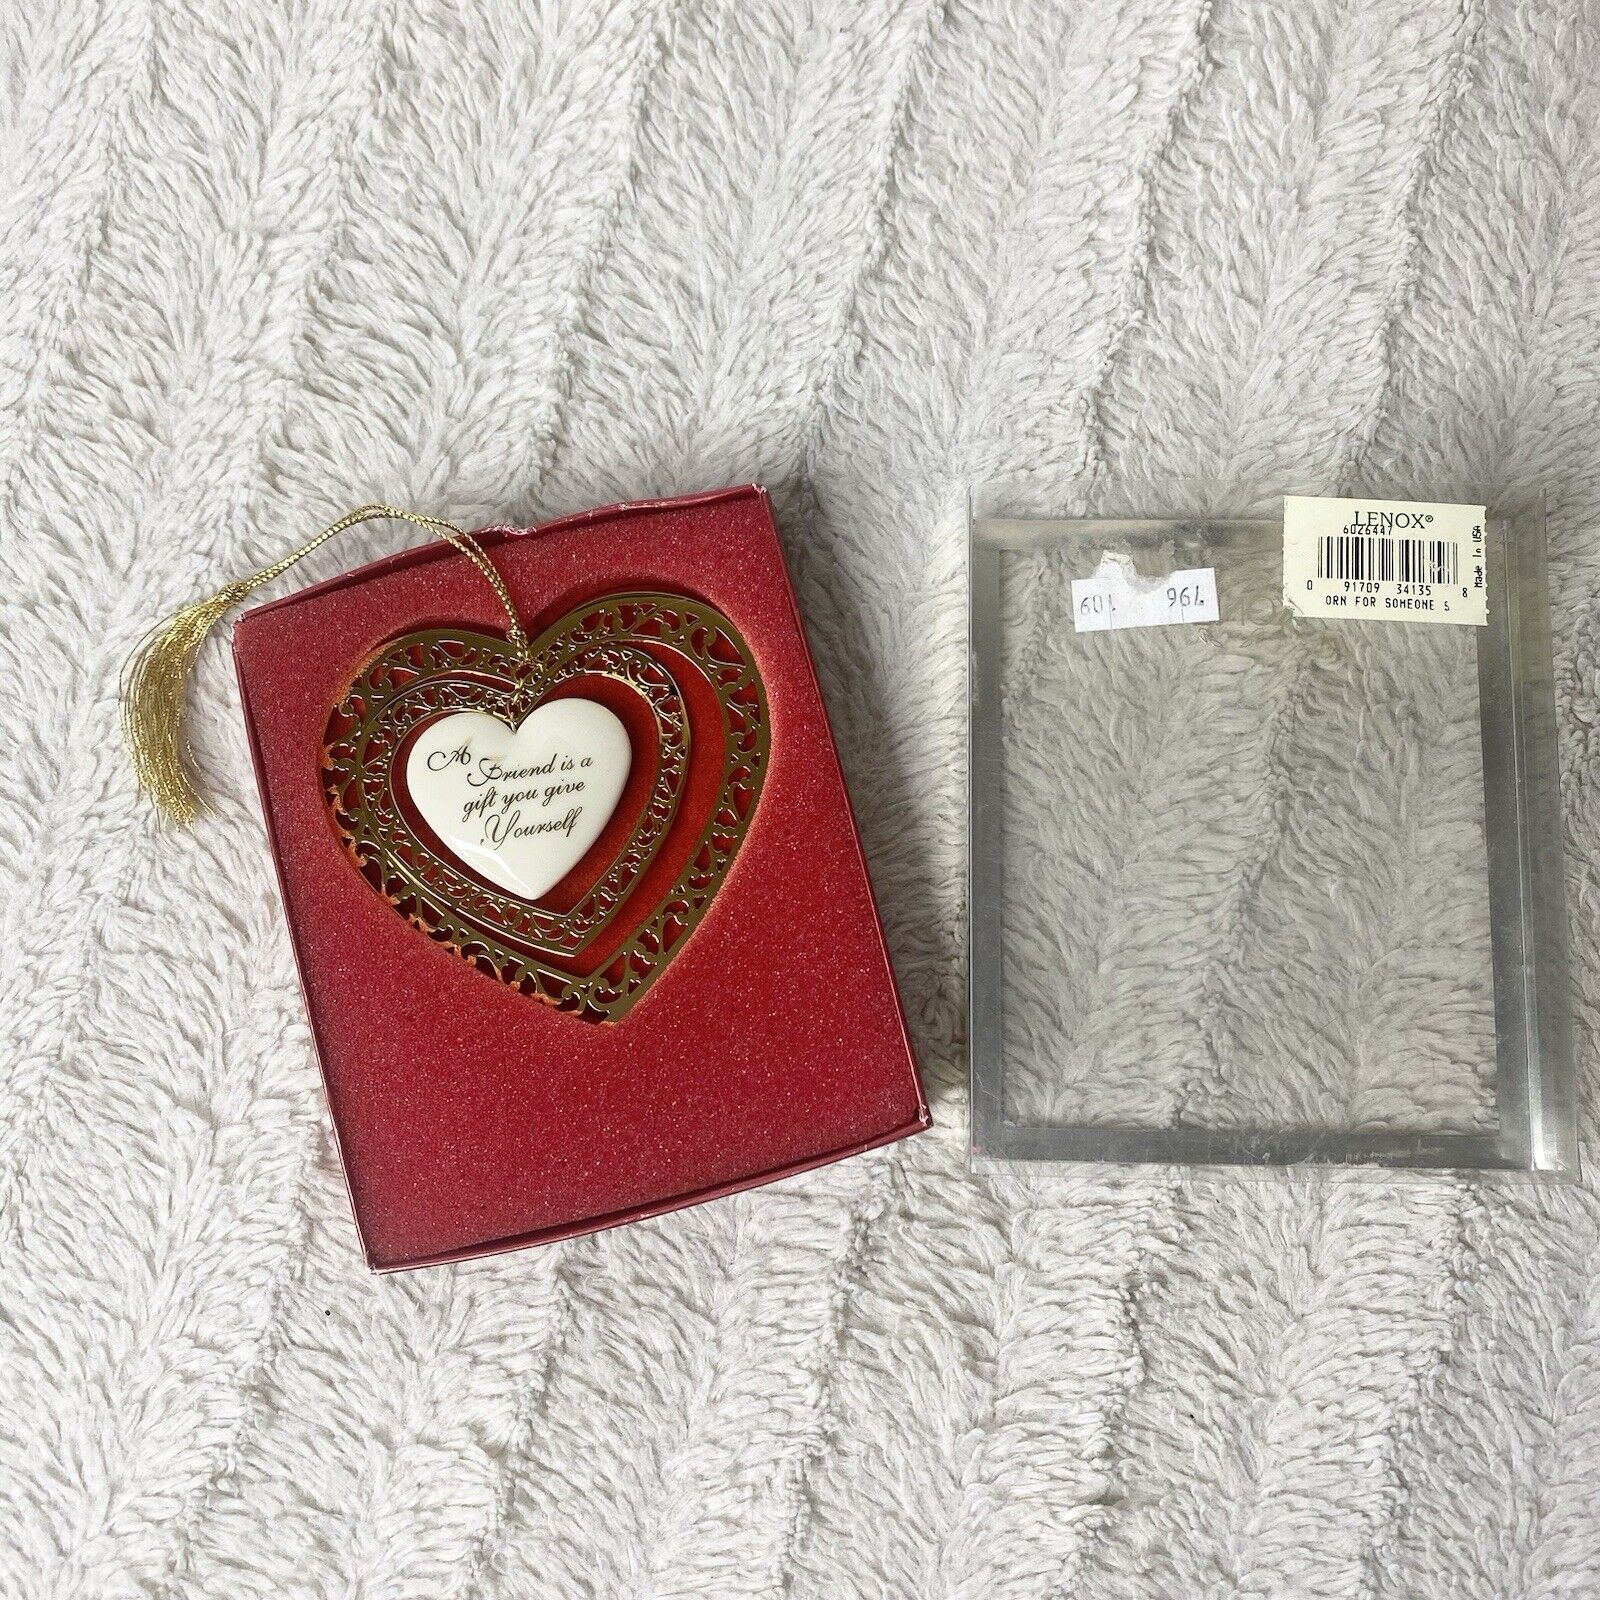 Lenox A Friend Is a Gift You Give Yourself Heart Ornament Gold White Christmas